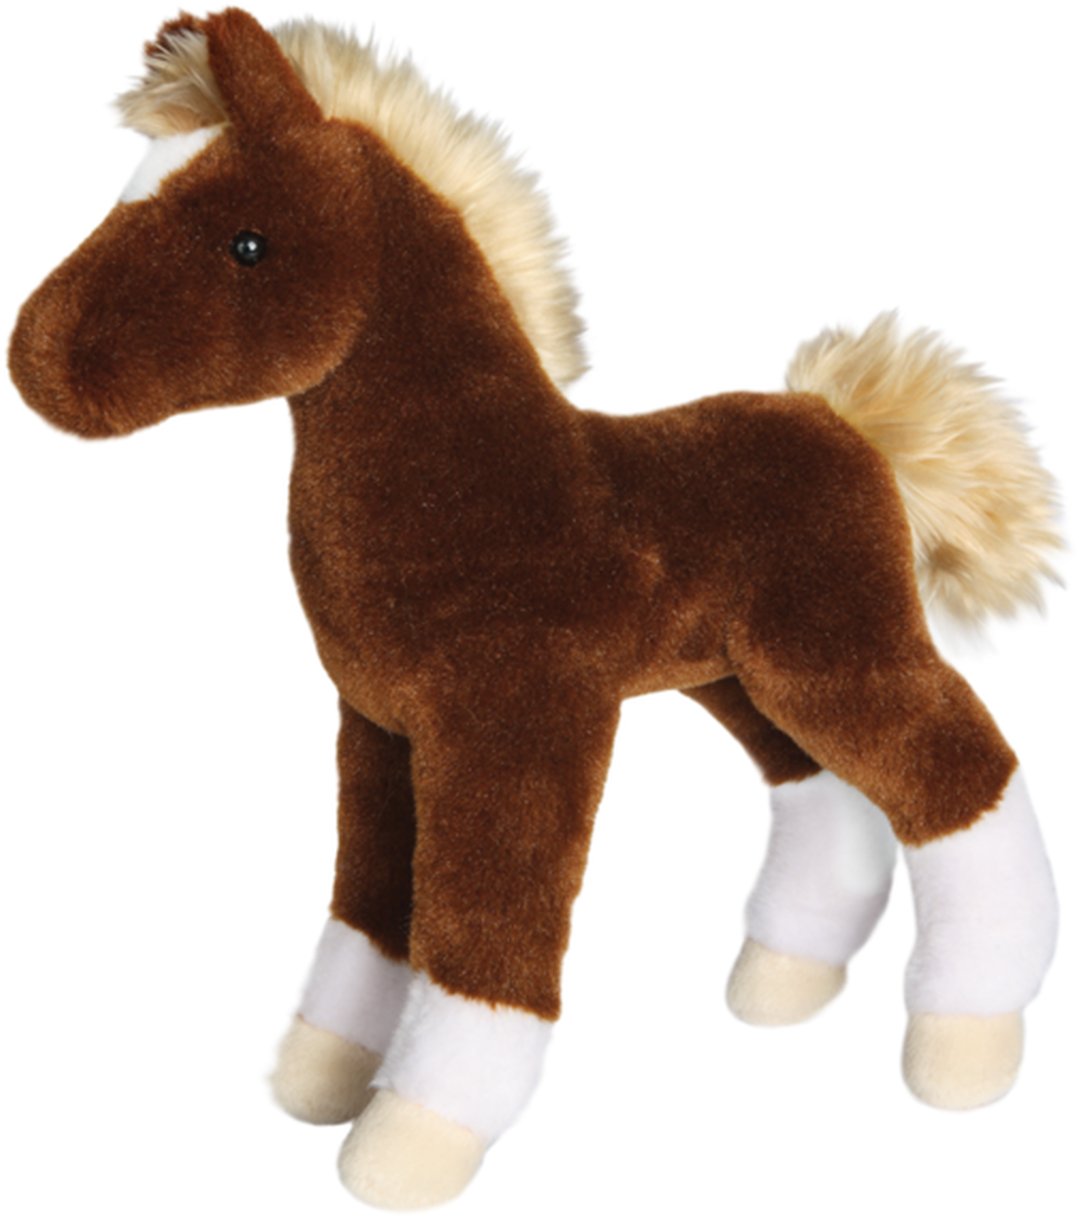 A Brown And White Stuffed Horse